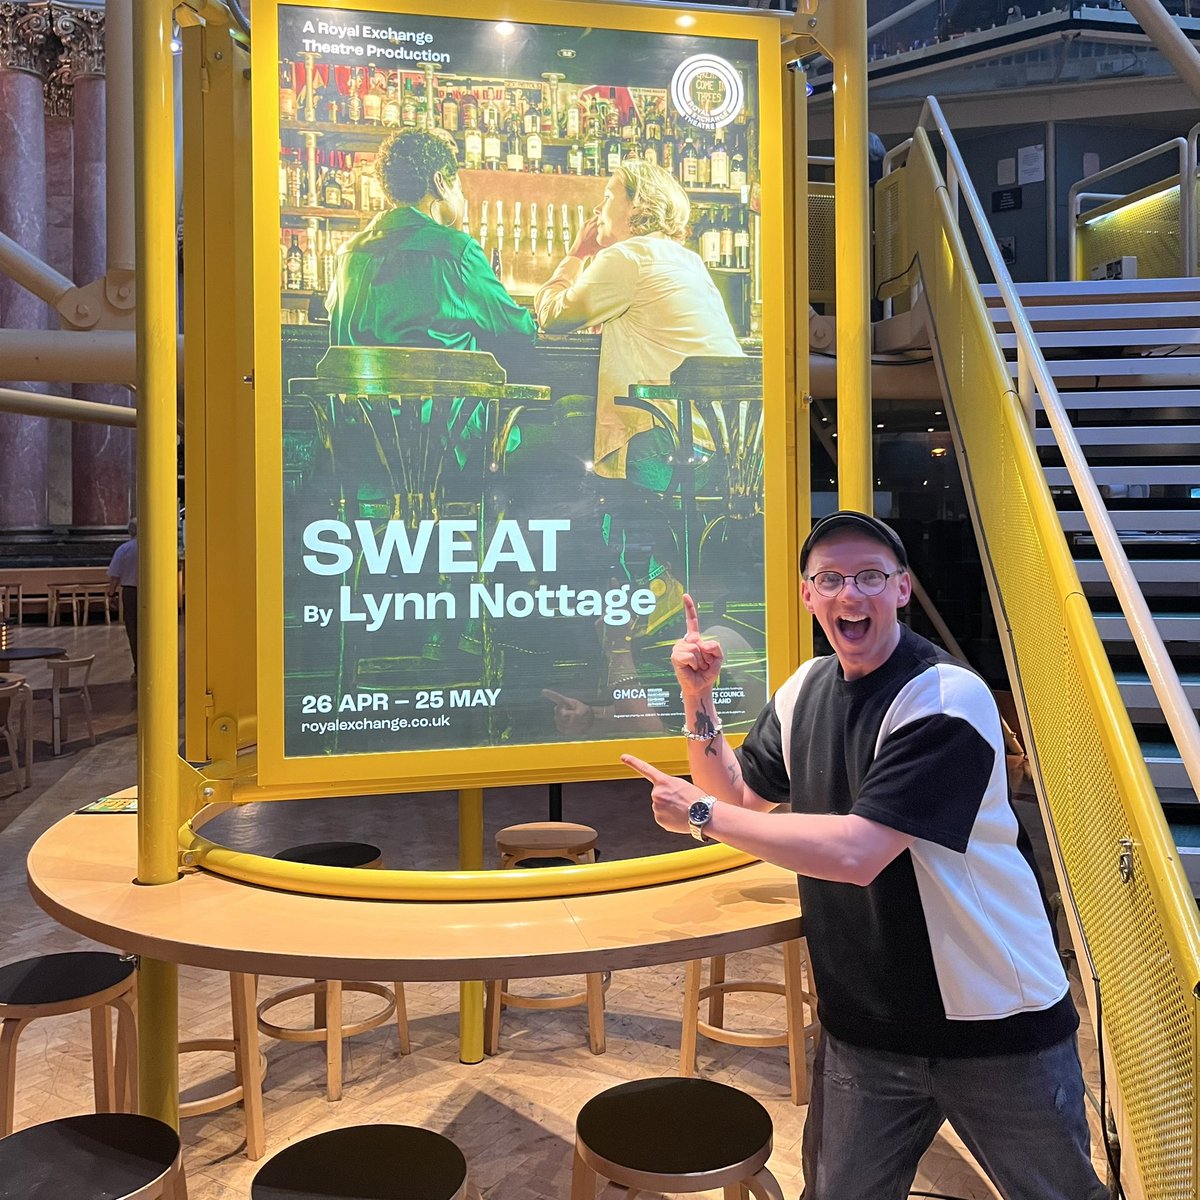 Tonight me & @whitehorseinn85 watched ‘Sweat’ at @rxtheatre. We really enjoyed it. It a very good, captivating play. The cast are brilliant. Loved the simple but very effective staging. We’ve had a great night!